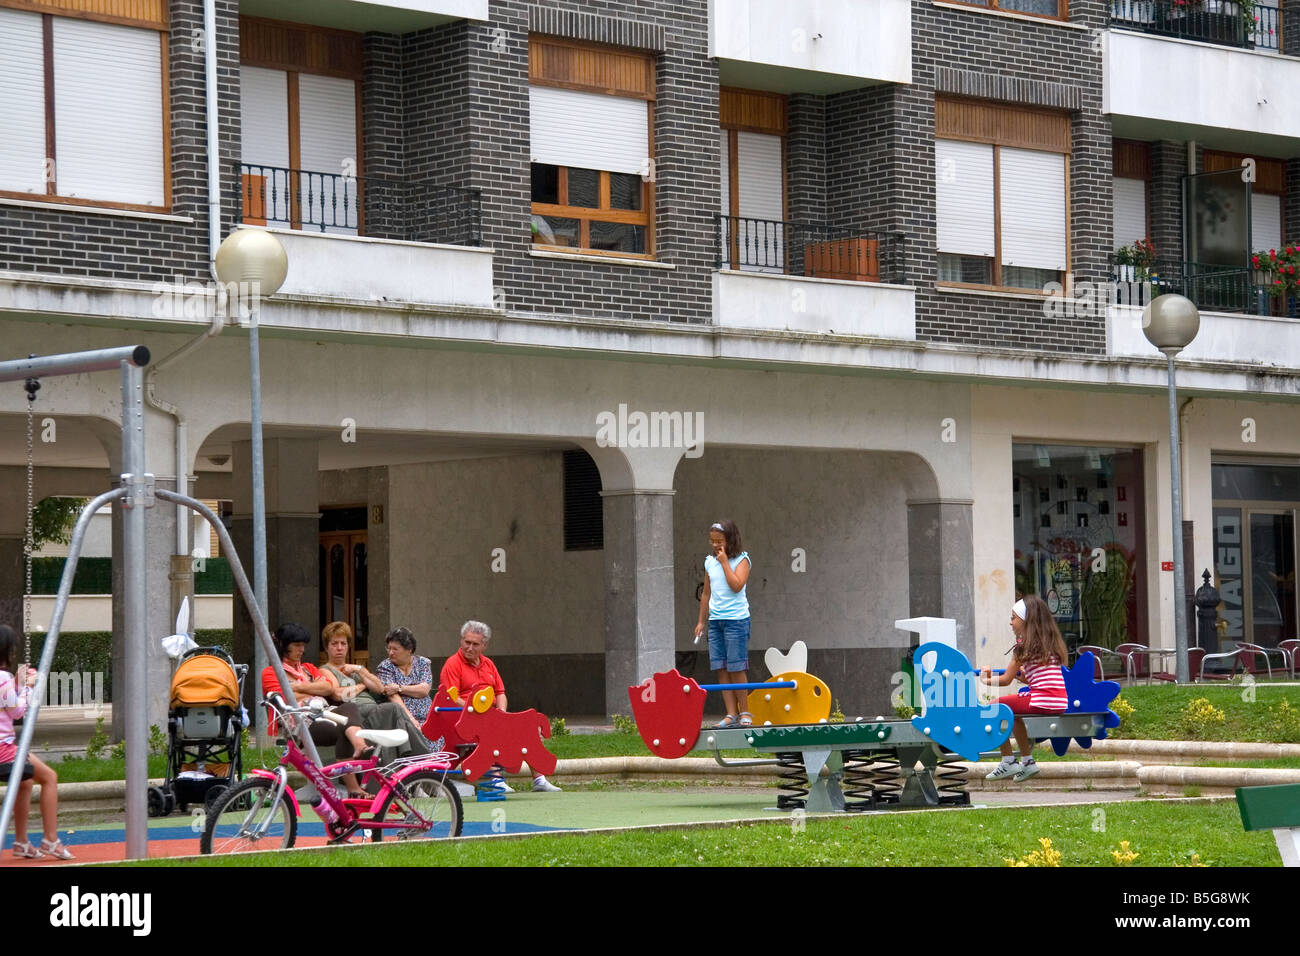 Children use playground equipment in front of an apartment housing unit in Guernica northern Spain Stock Photo